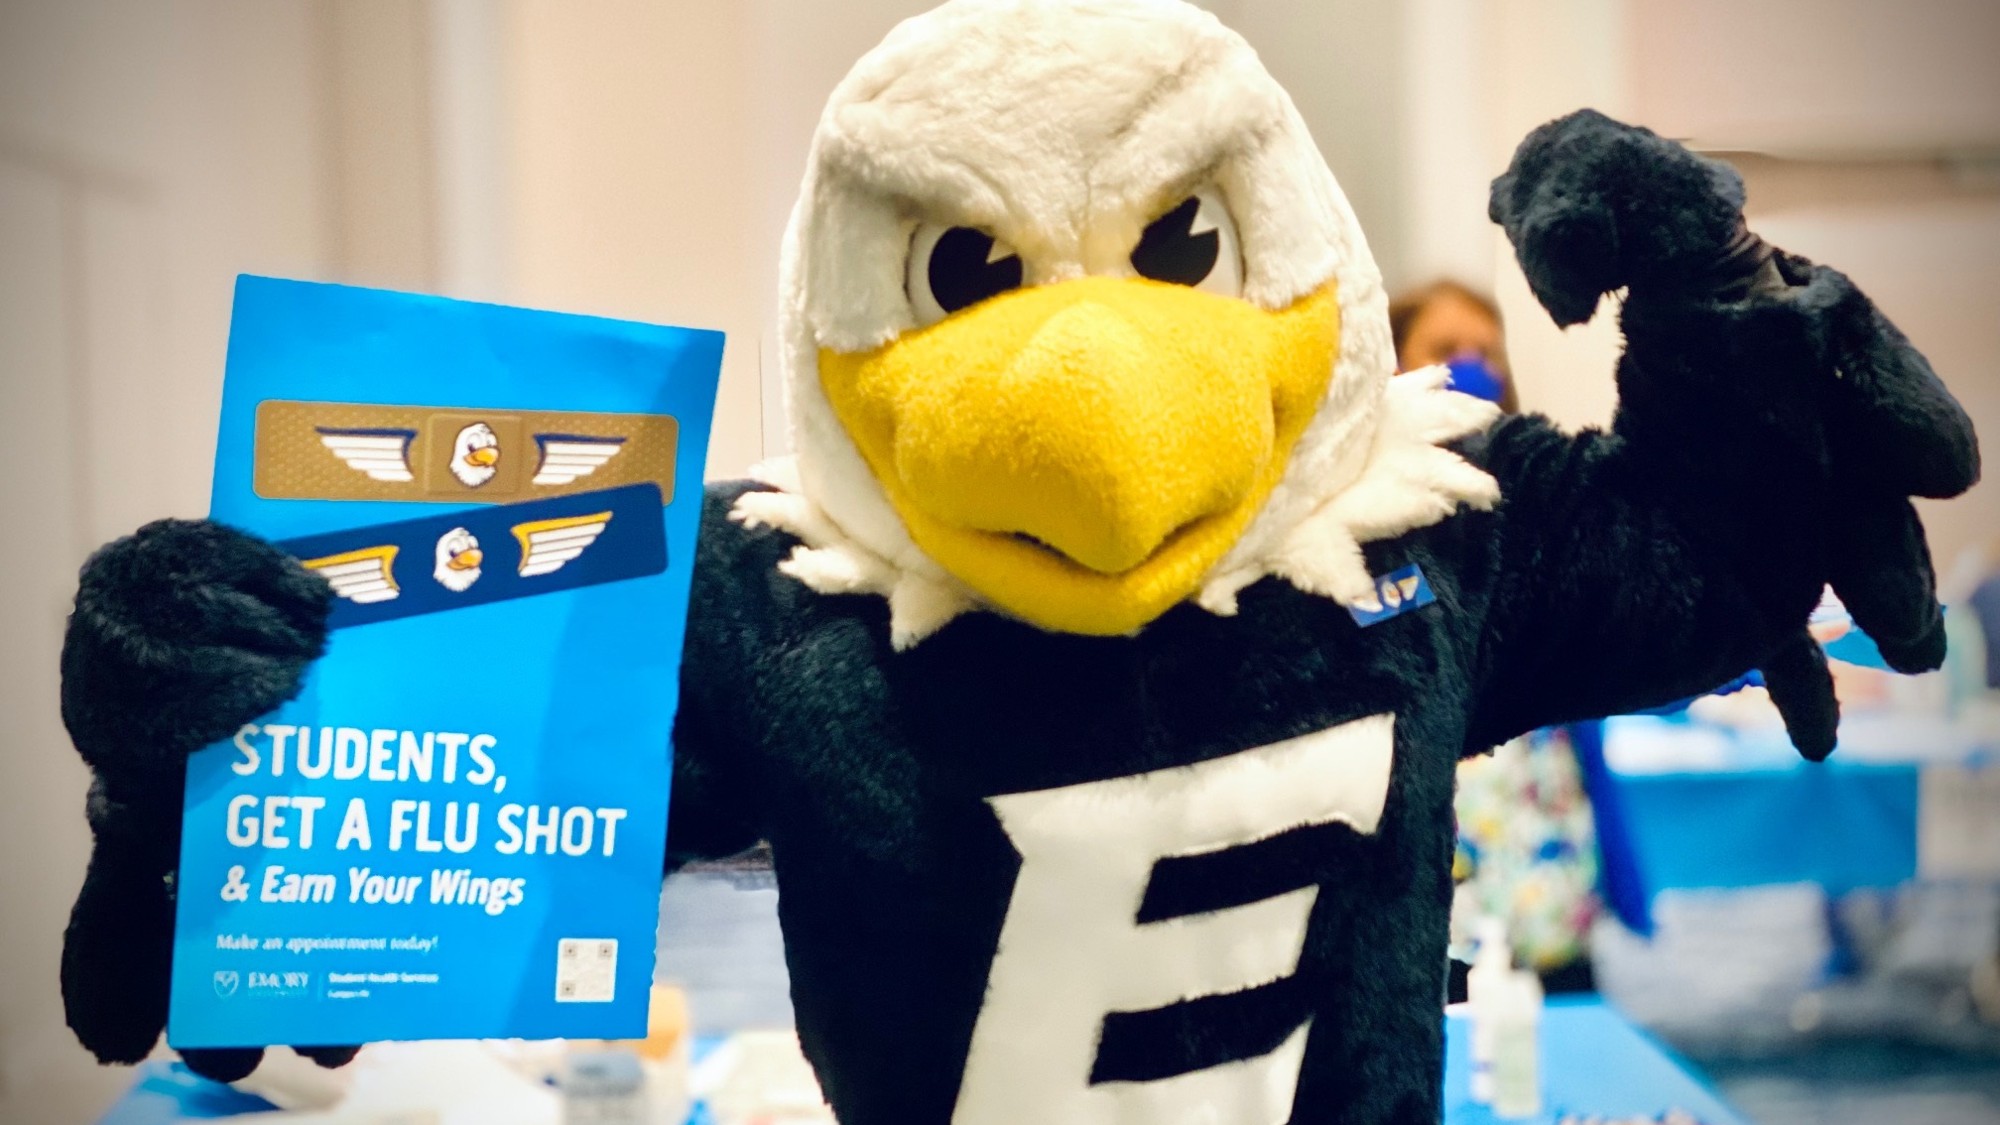 Swoop the Emory holding a flu vaccine promotion sign